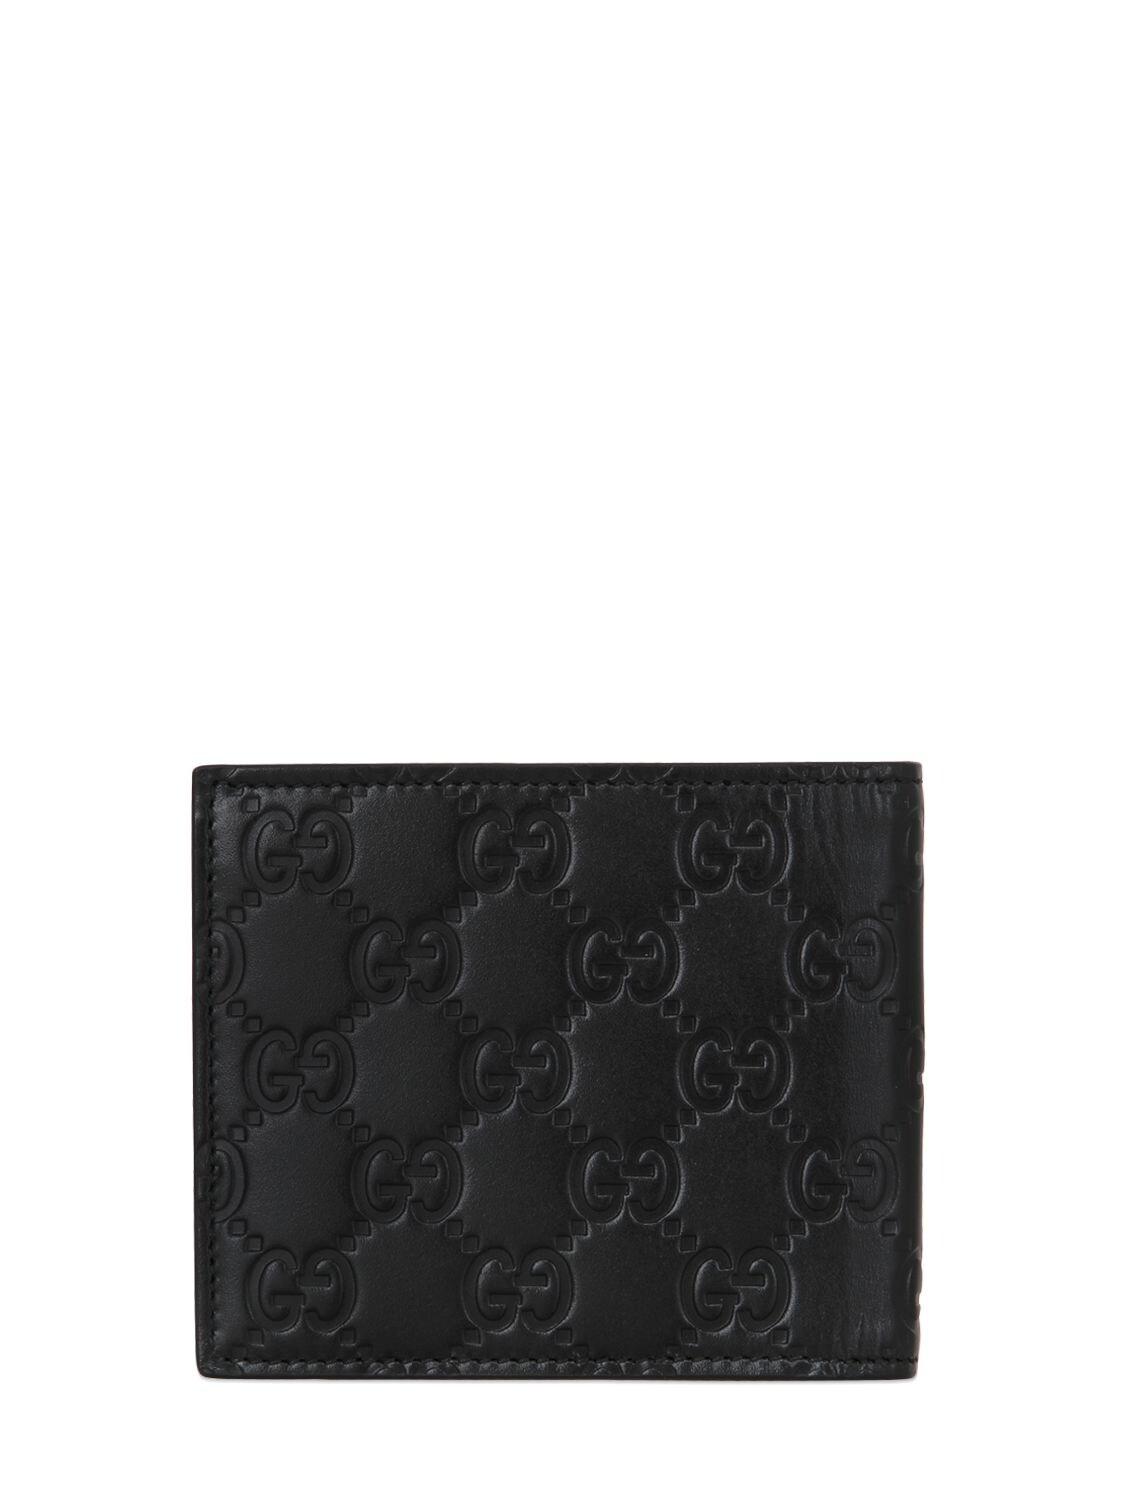 Gucci Gg Embossed Leather Wallet in Black for Men | Lyst